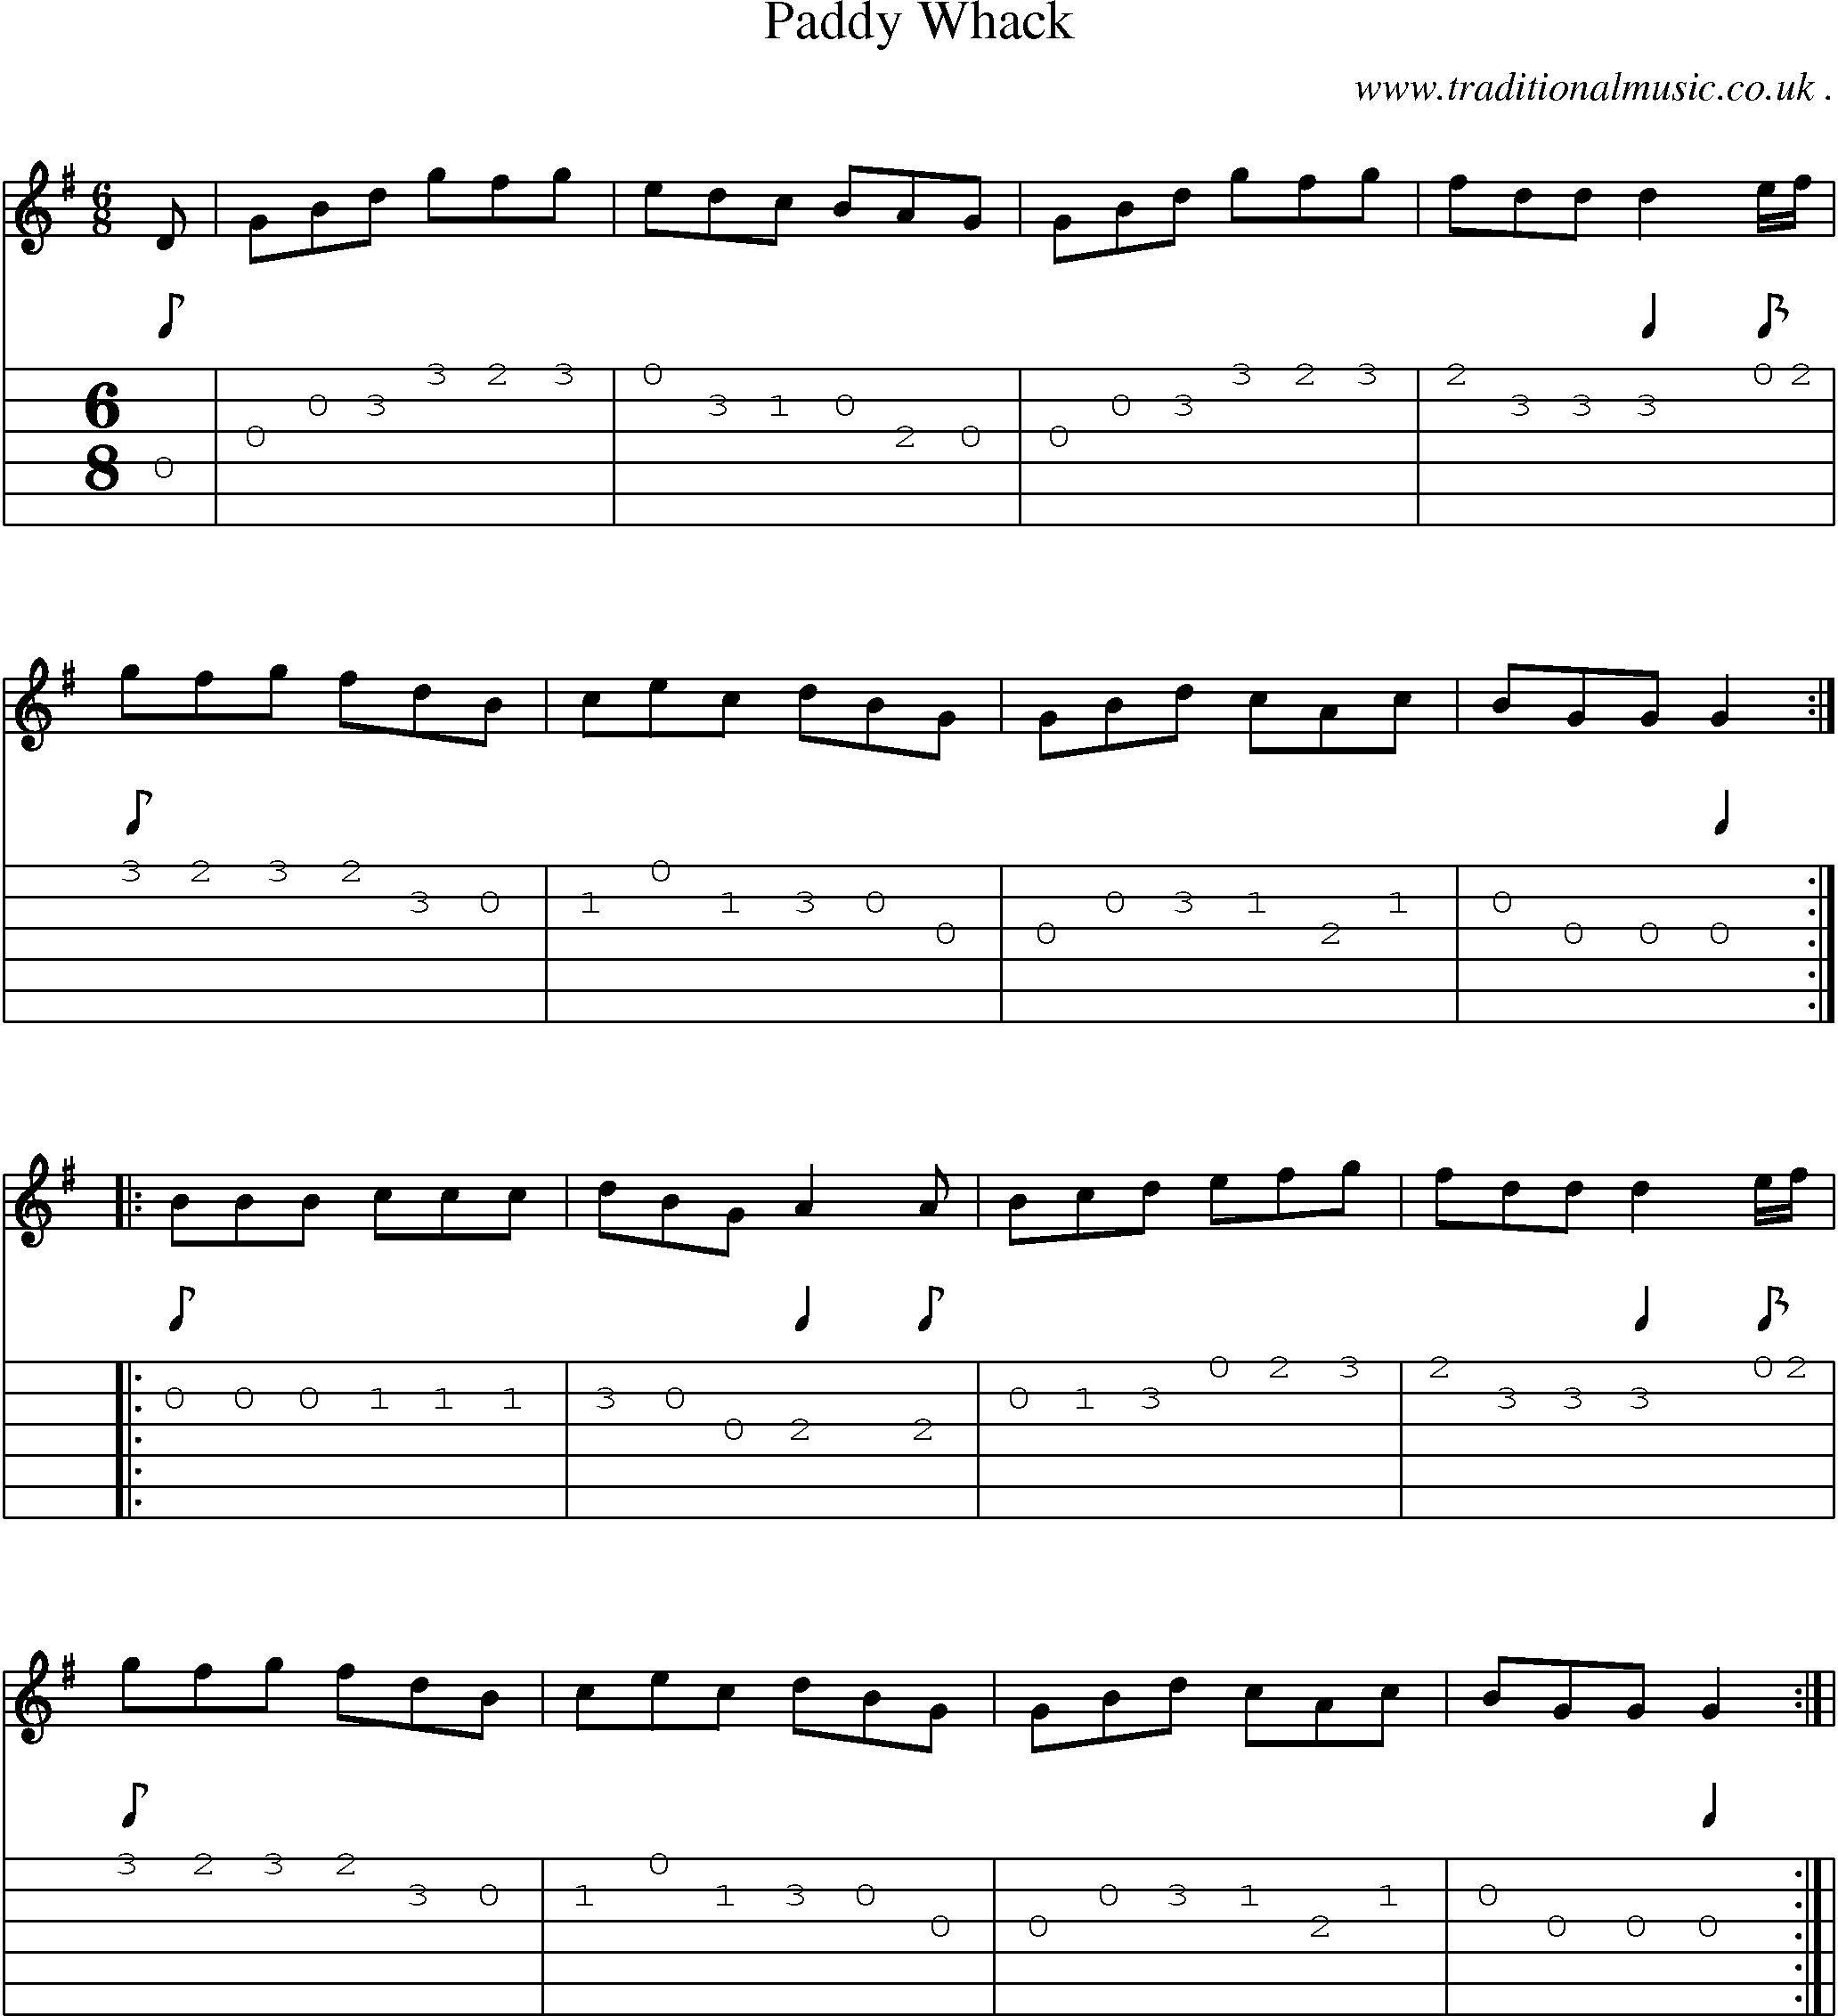 Sheet-Music and Guitar Tabs for Paddy Whack